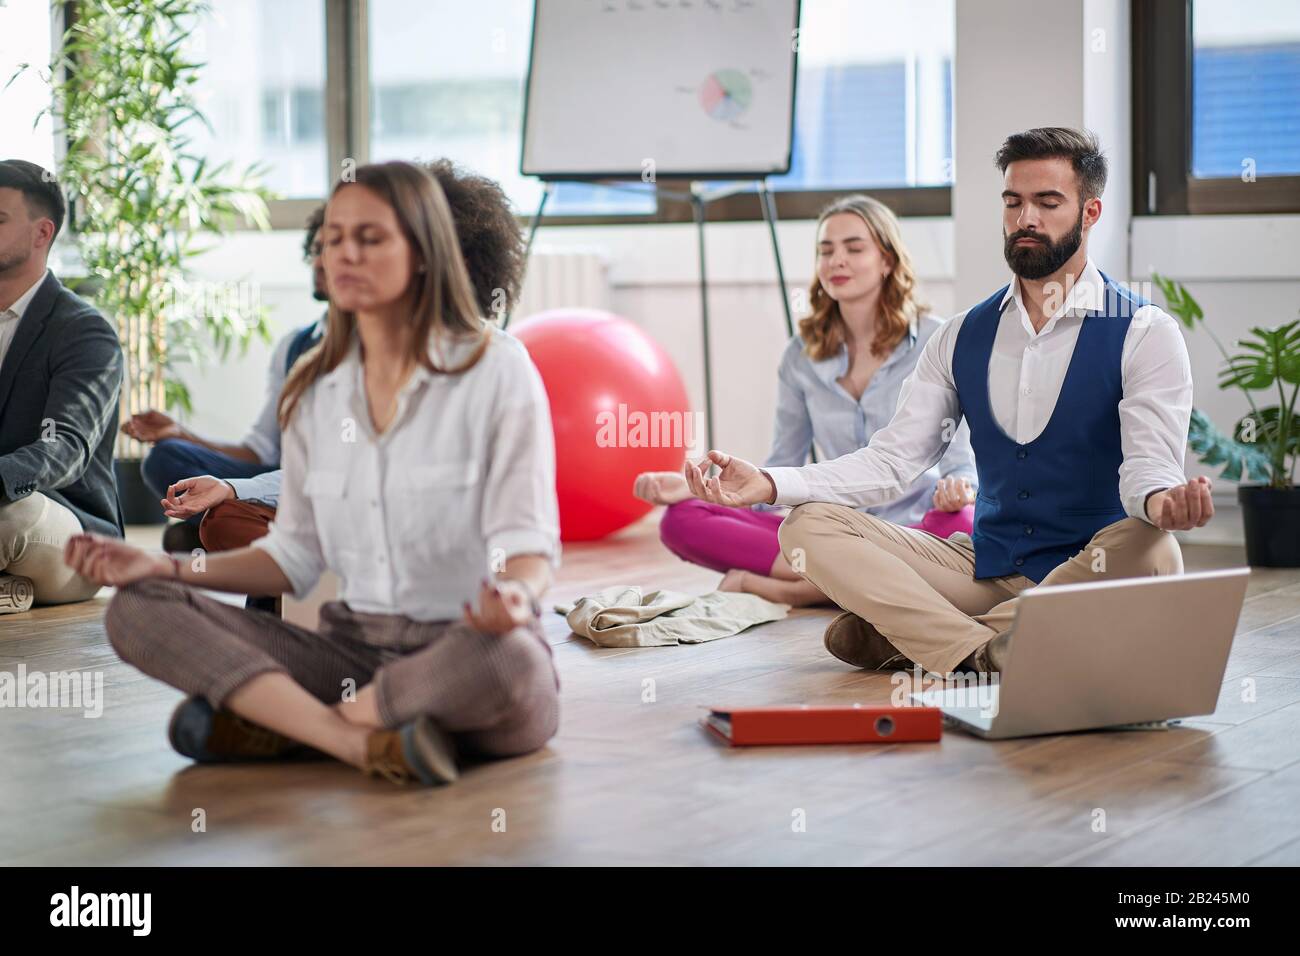 Business man meditating at work.group of business coworkers meditating together at work. Stock Photo